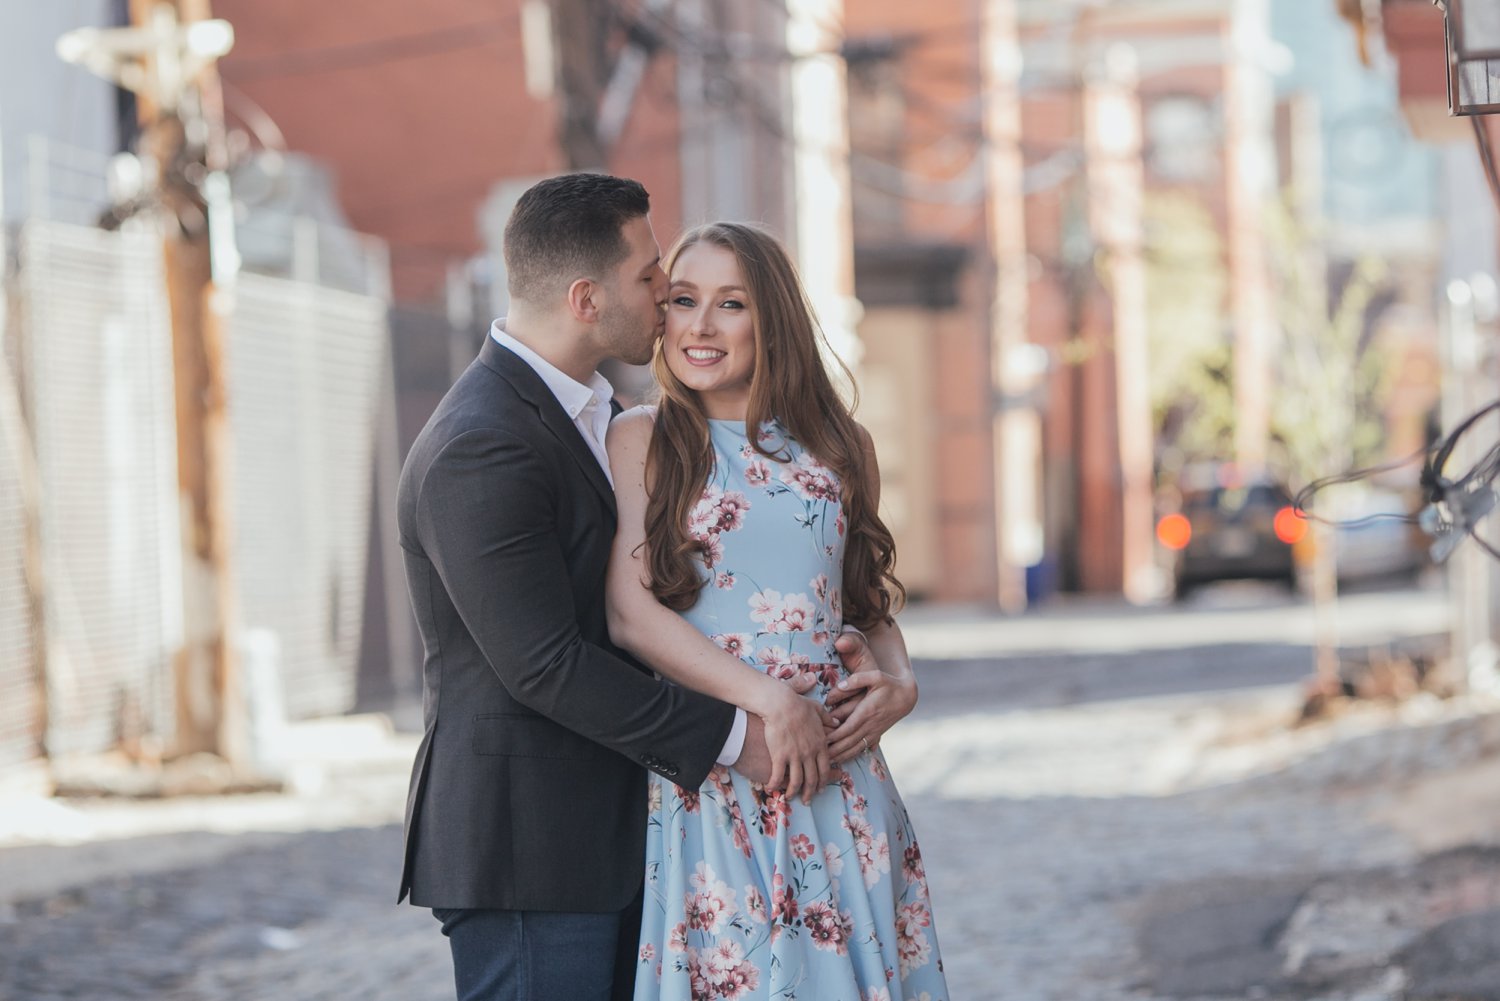 44NYC-NJ-ENGAGEMENT-PHOTOGRAPHY-BY-INTOTHESTORY-MOO-JAE.JPG